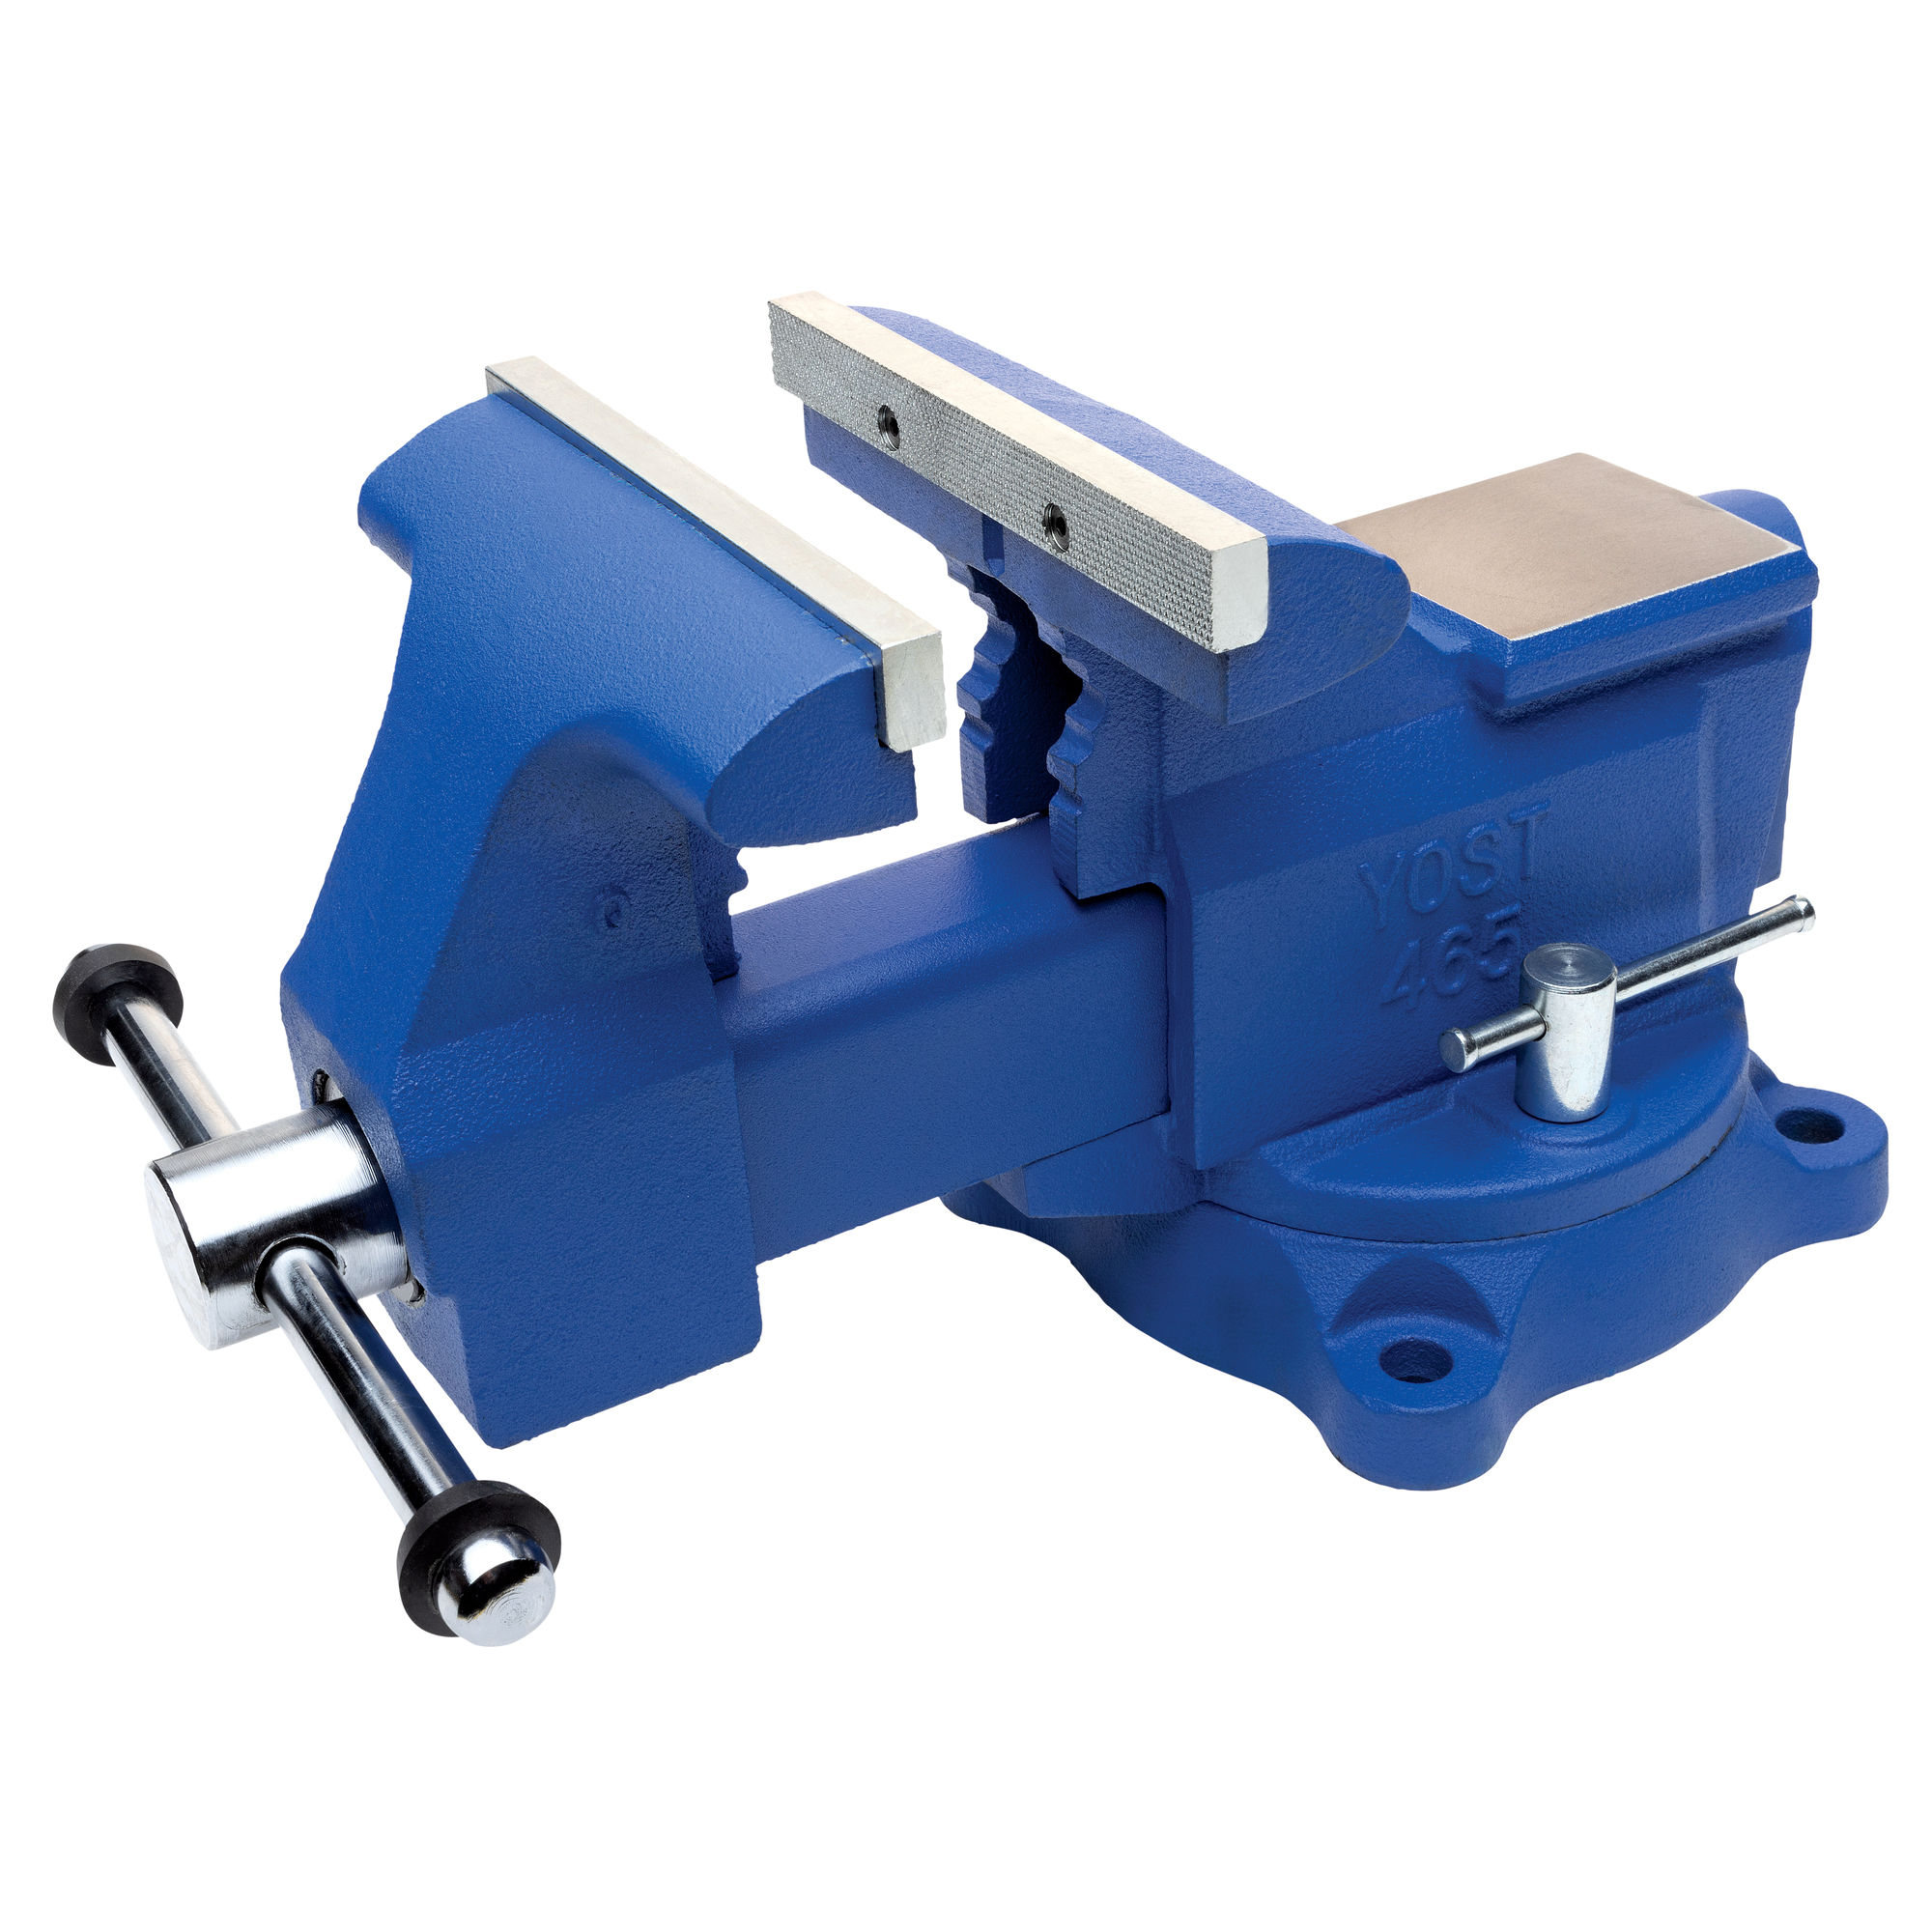 Yost Vises, 6.5Inch Utility Bench Vise, Jaw Width 6.5 in, Material Cast Iron, Model 465